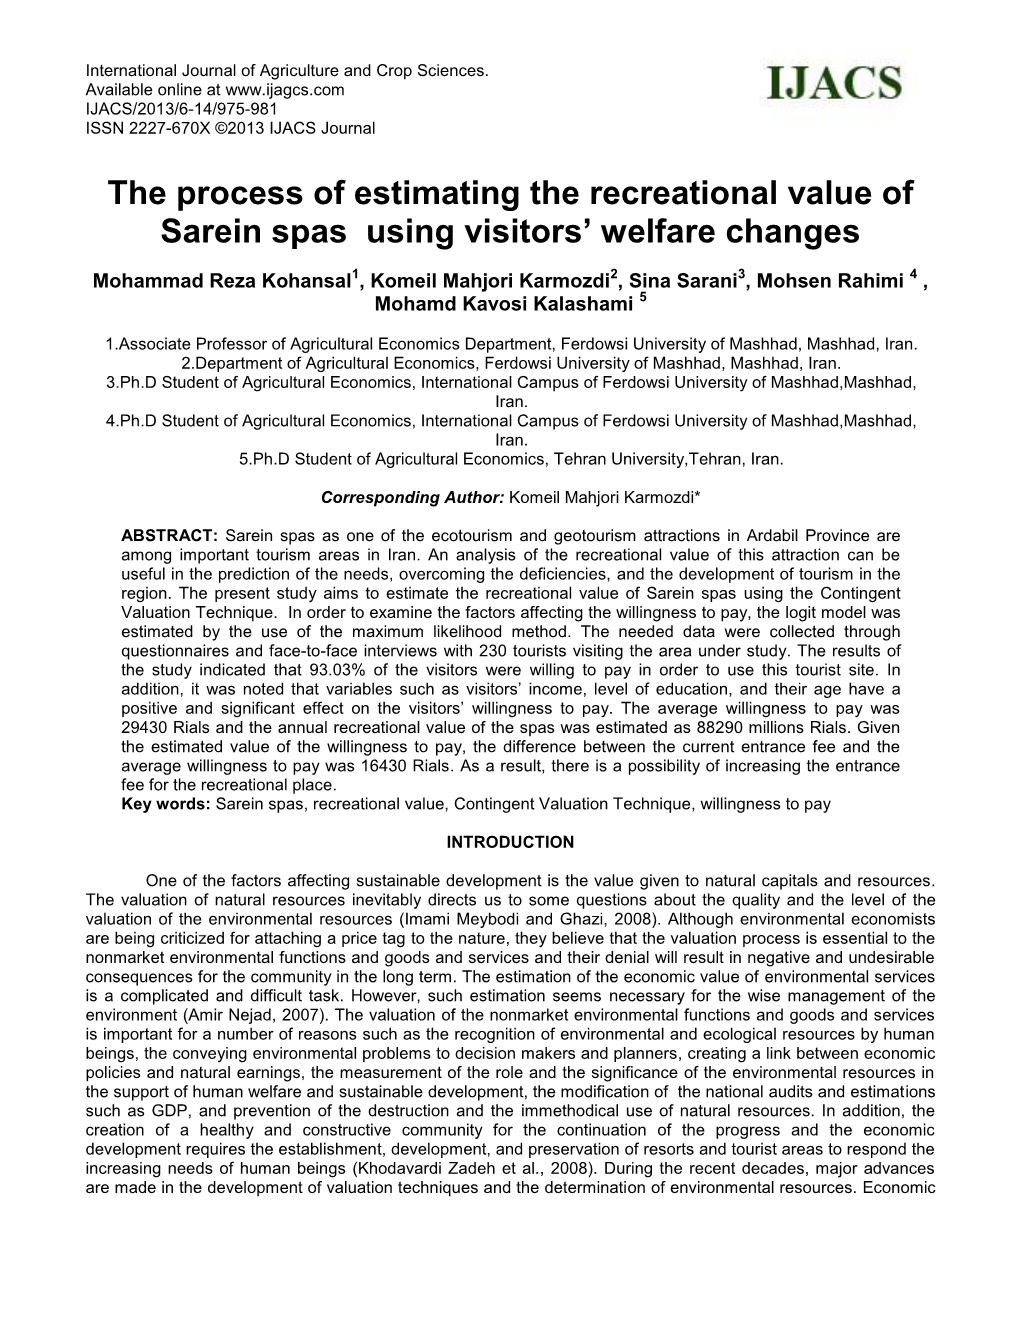 The Process of Estimating the Recreational Value of Sarein Spas Using Visitors’ Welfare Changes